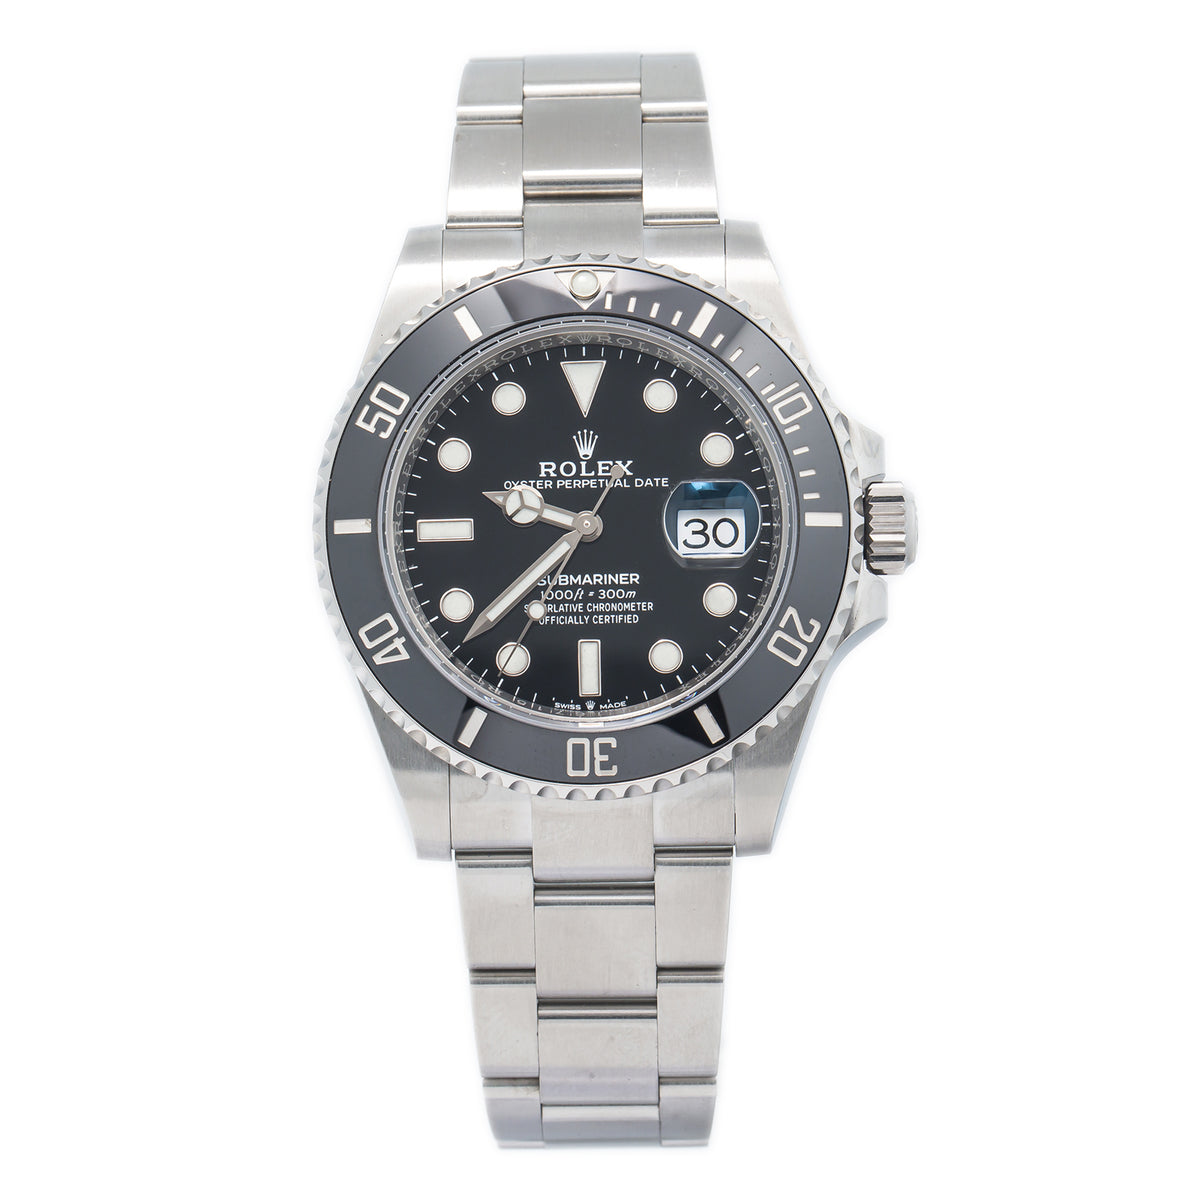 Rolex Submariner 126610LN with Card 2021 Stainless Steel Black Dial Watch 41mm